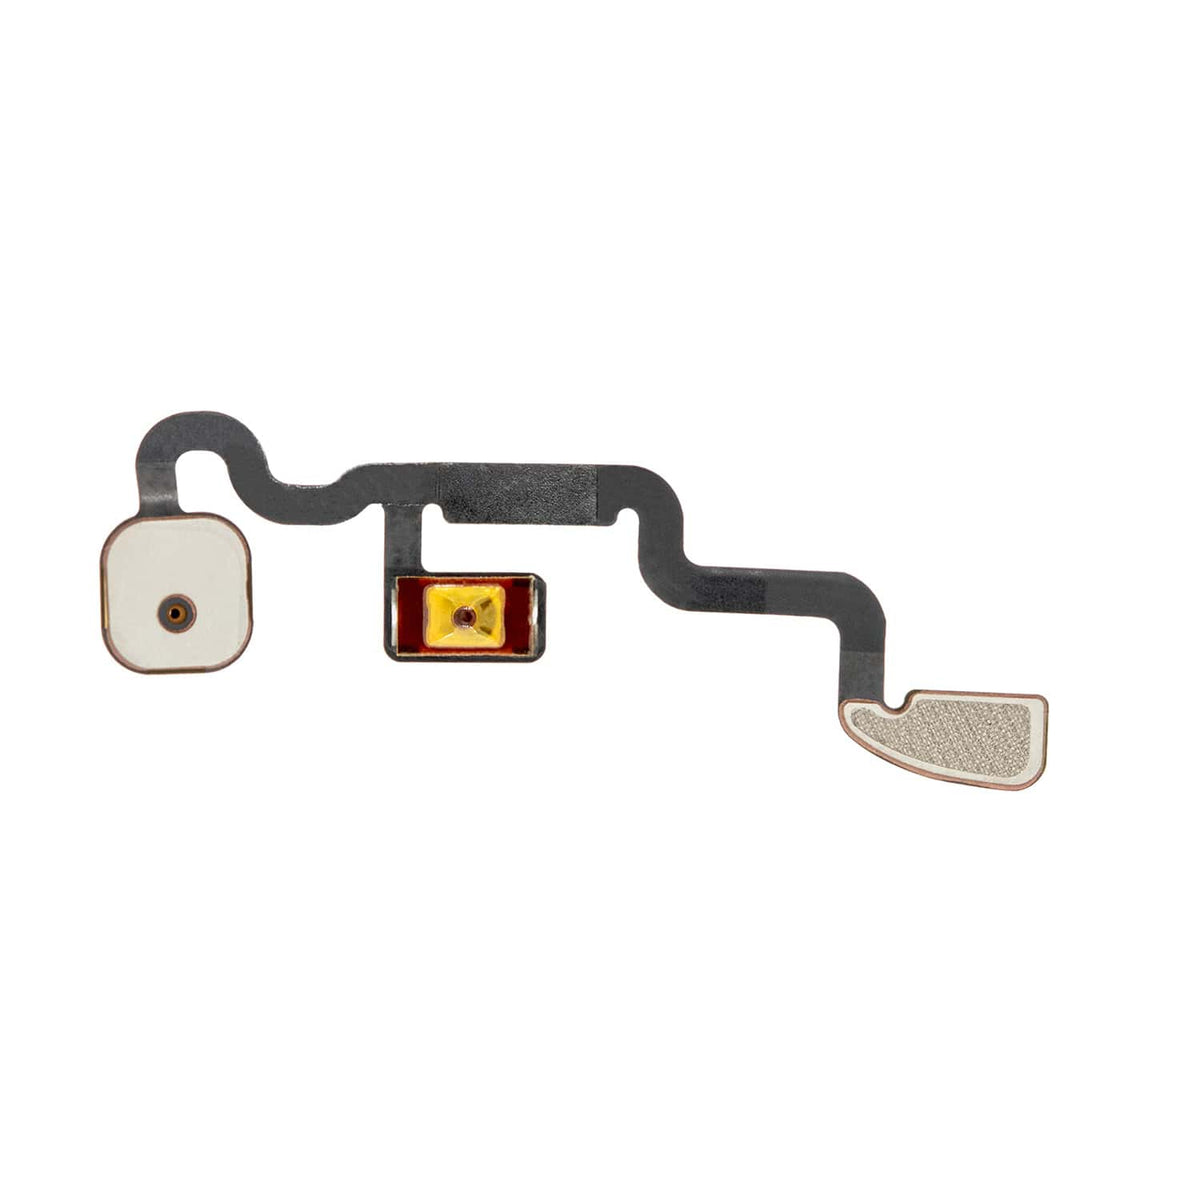 POWER BUTTON FLEX CABLE FOR APPLE WATCH S6 40MM